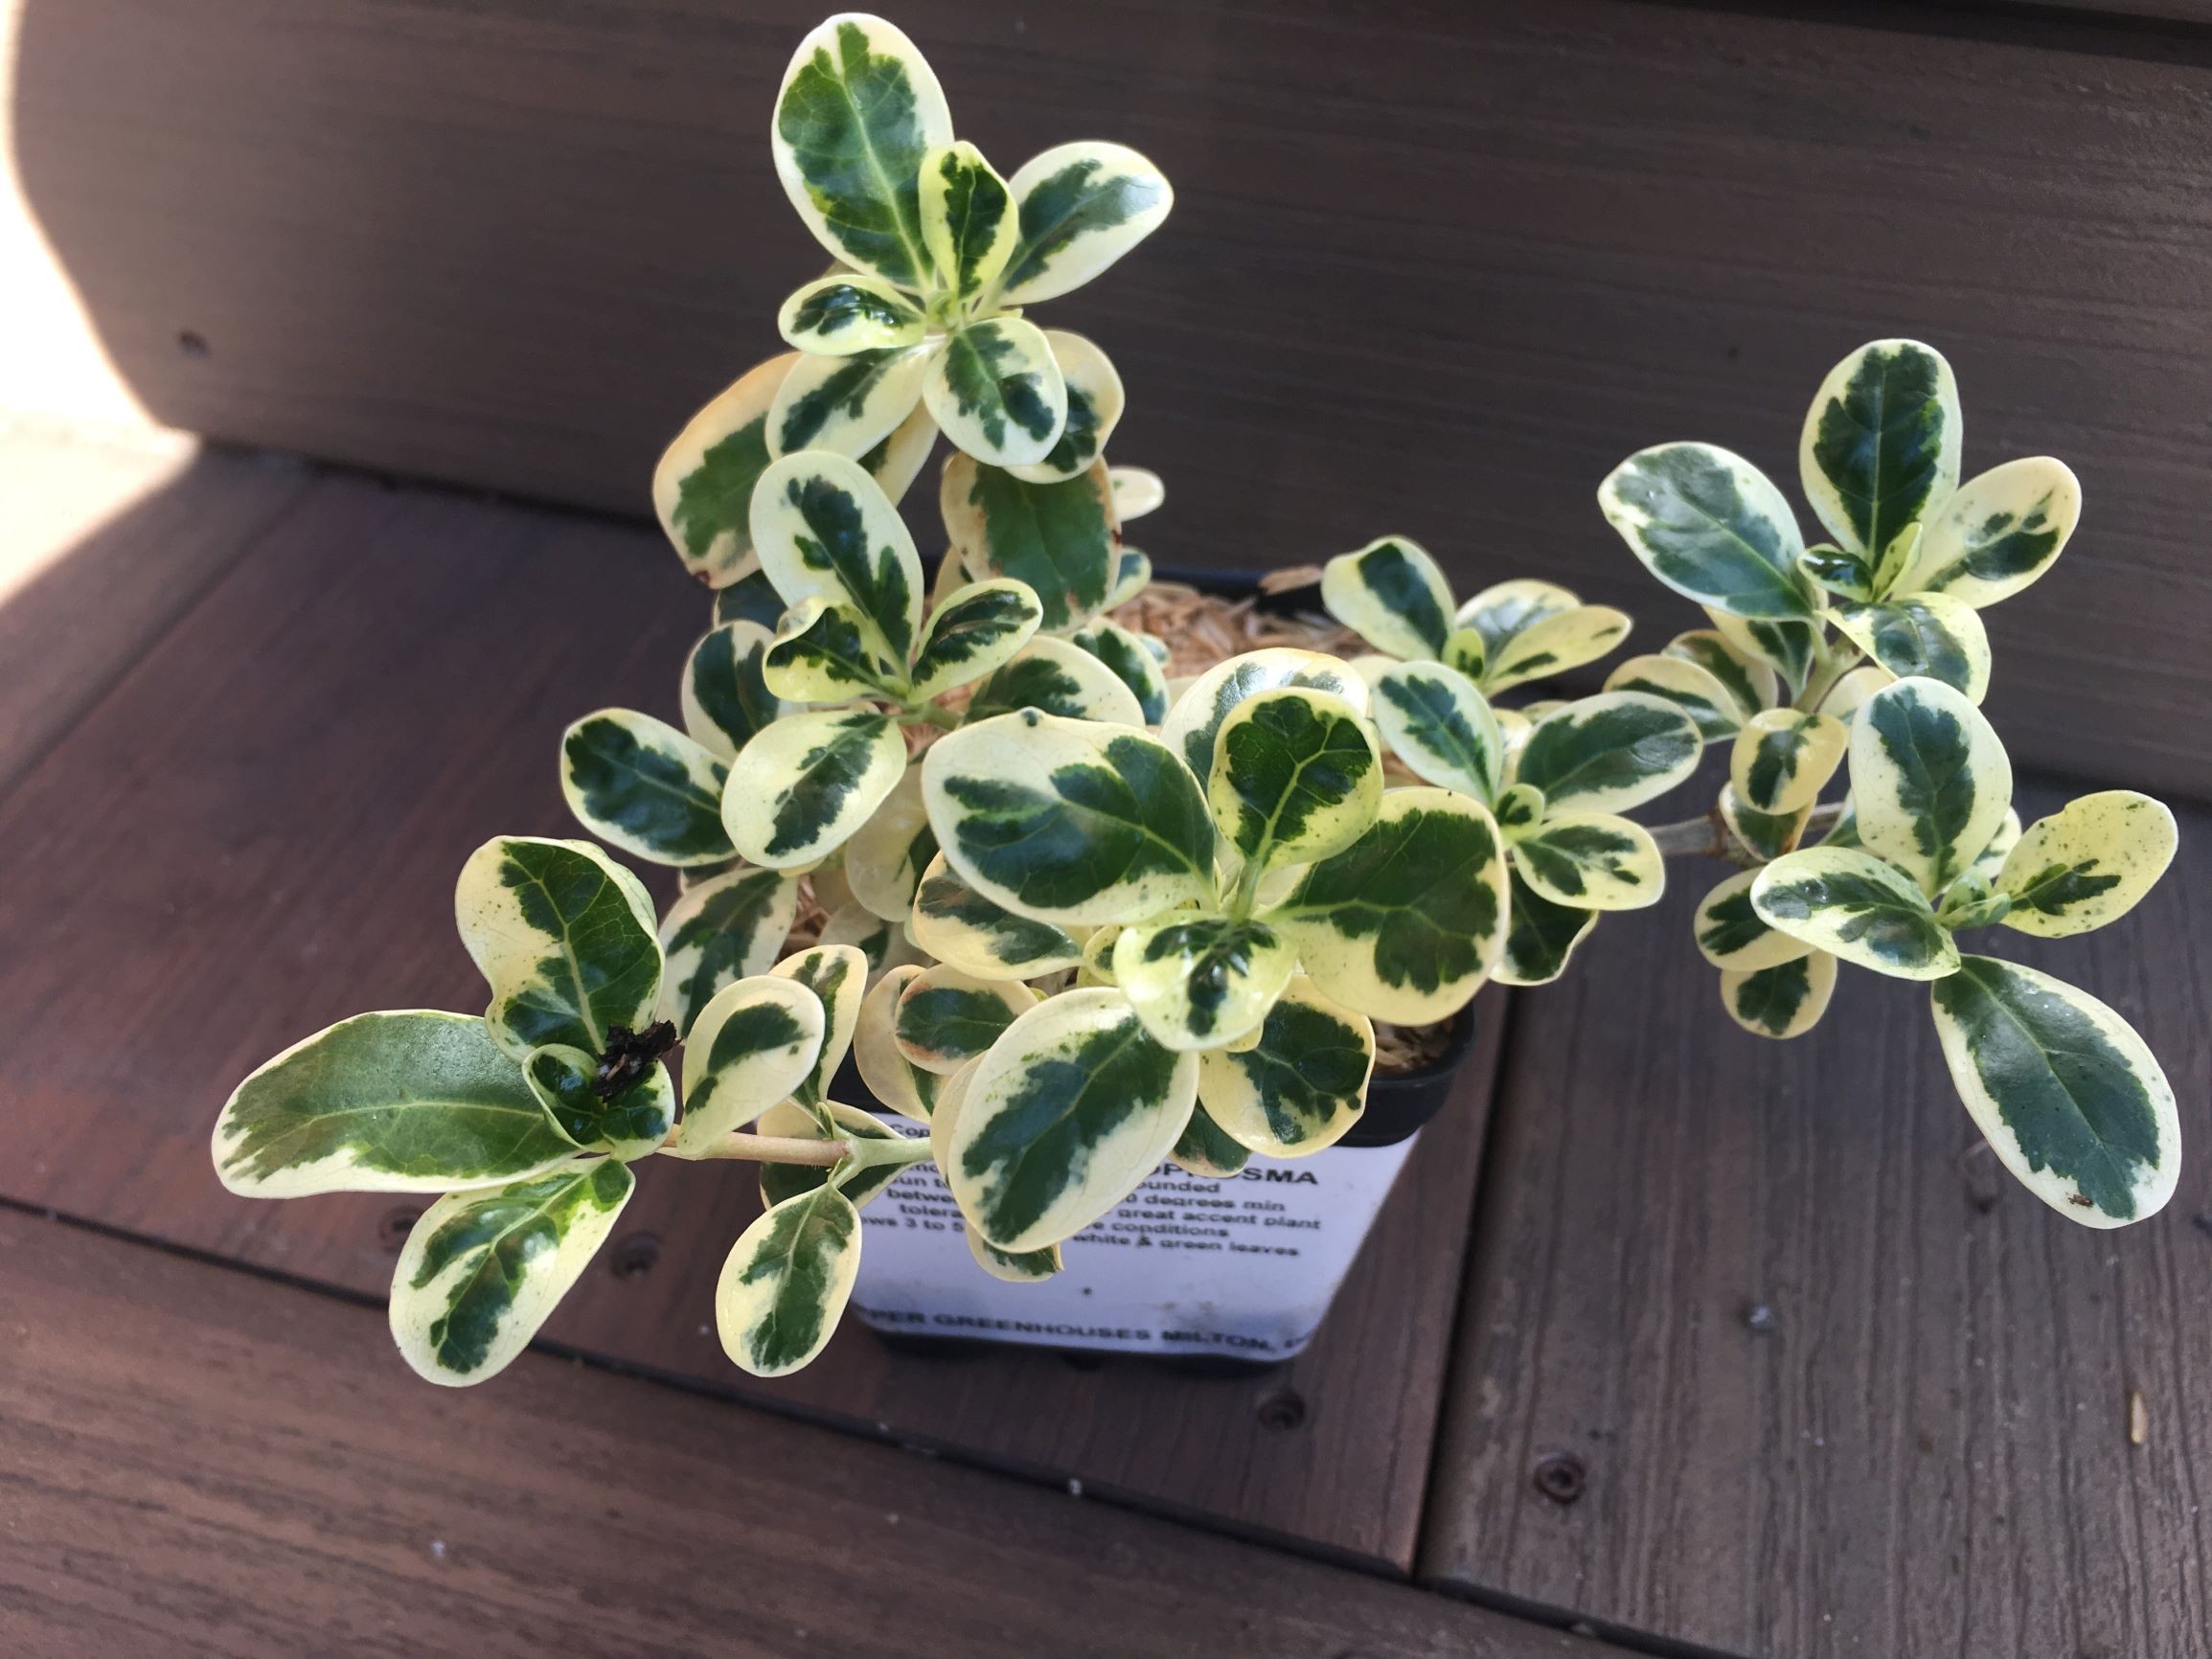 Coprosma Repens Marble Queen